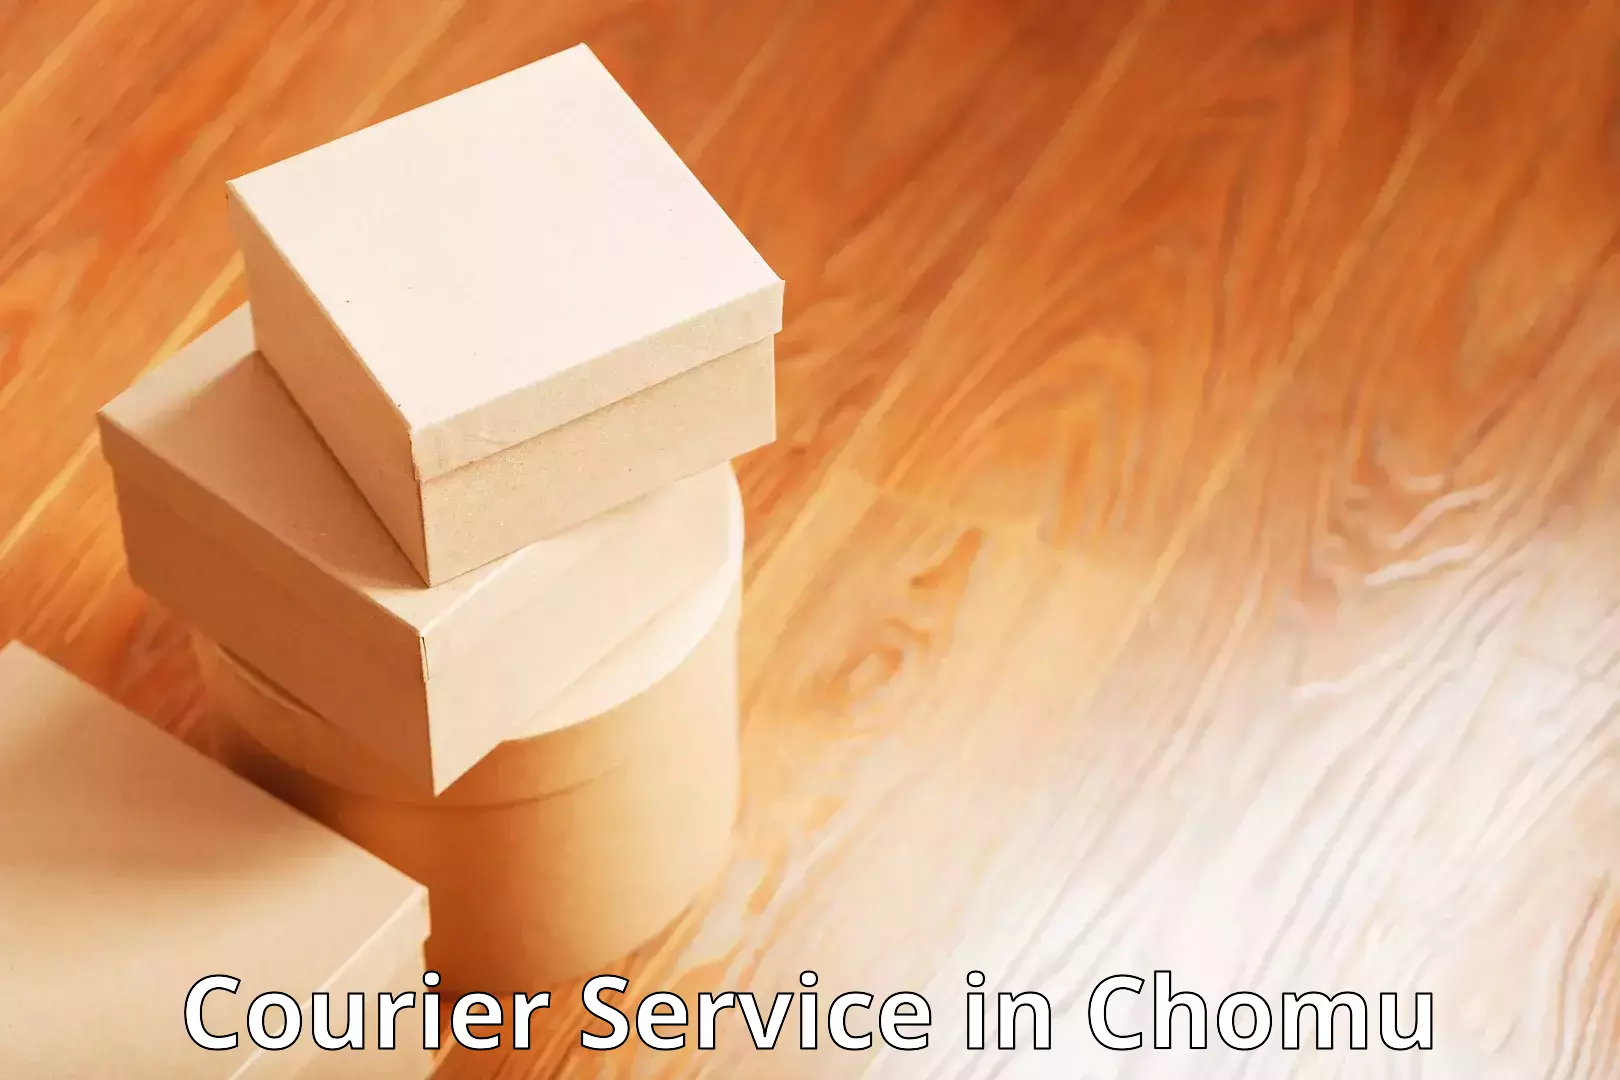 Logistics and distribution in Chomu